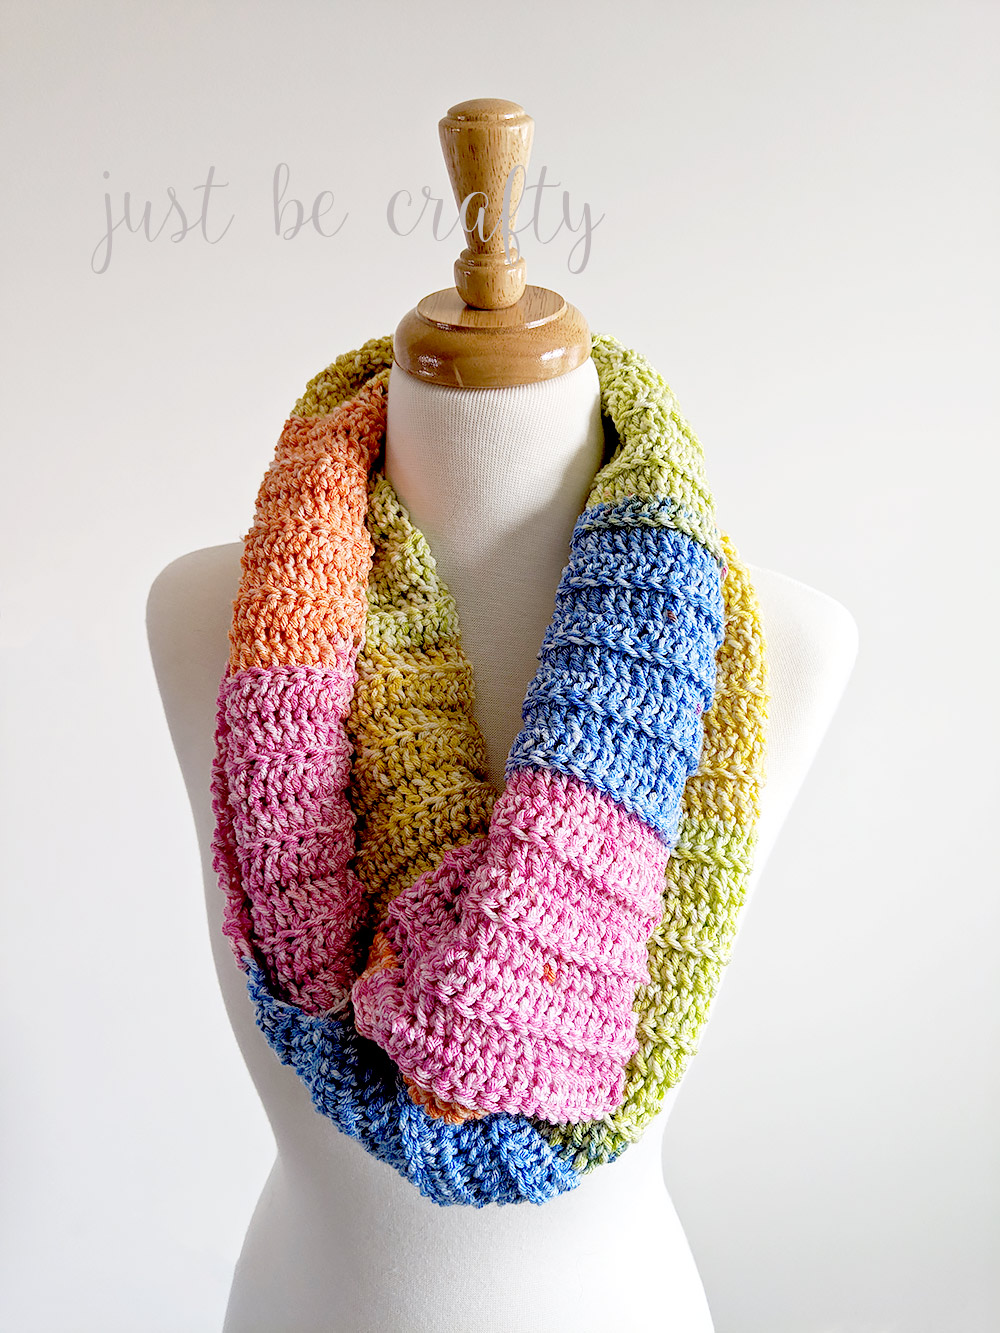 Crochet Ribbed Color Block Cowl - Free Pattern and Video Tutorial by Just Be Crafty